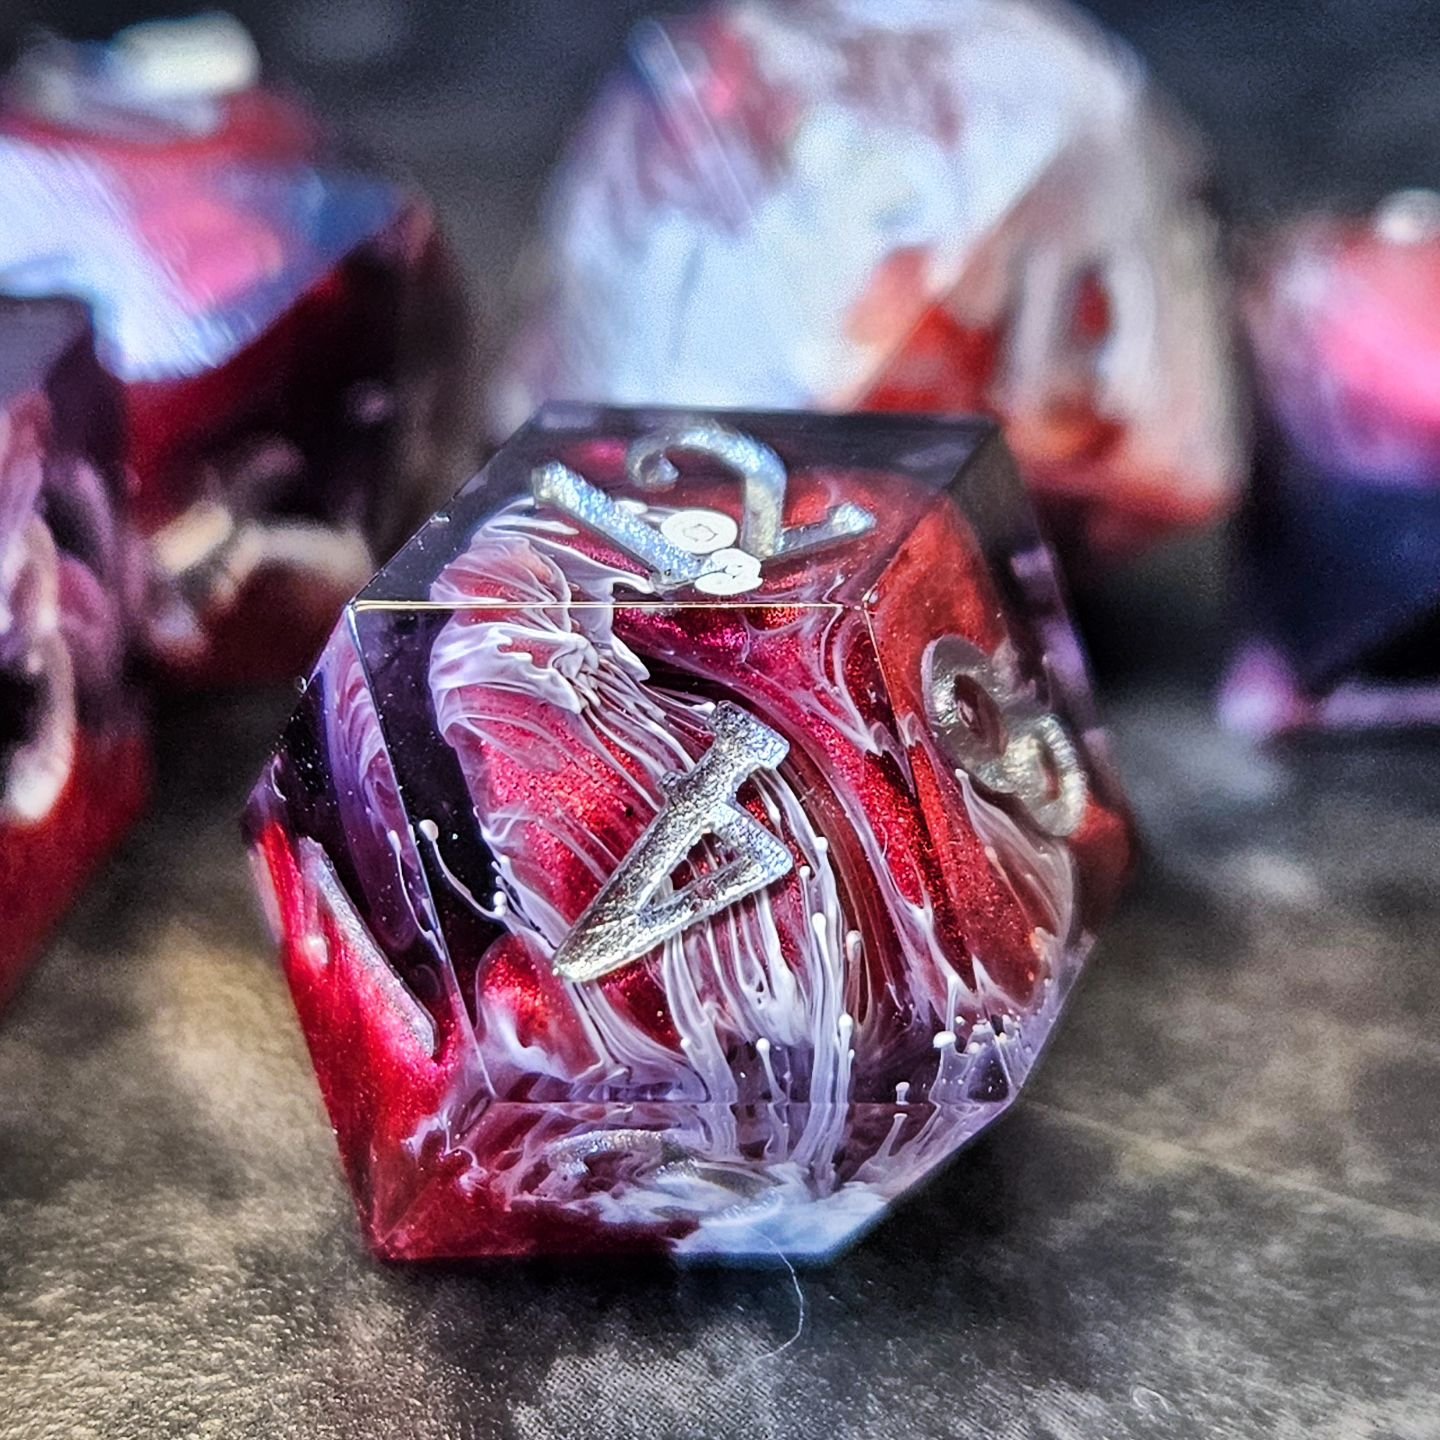 Spawn ○ this #astarion inspired set will be available in the next shop drop tomorrow! Available from the 28th of April at 6pm GMT 
&deg;
#dice  #diceset #dicemaking #dicegoblin #dnddice #dnd5e #dnd